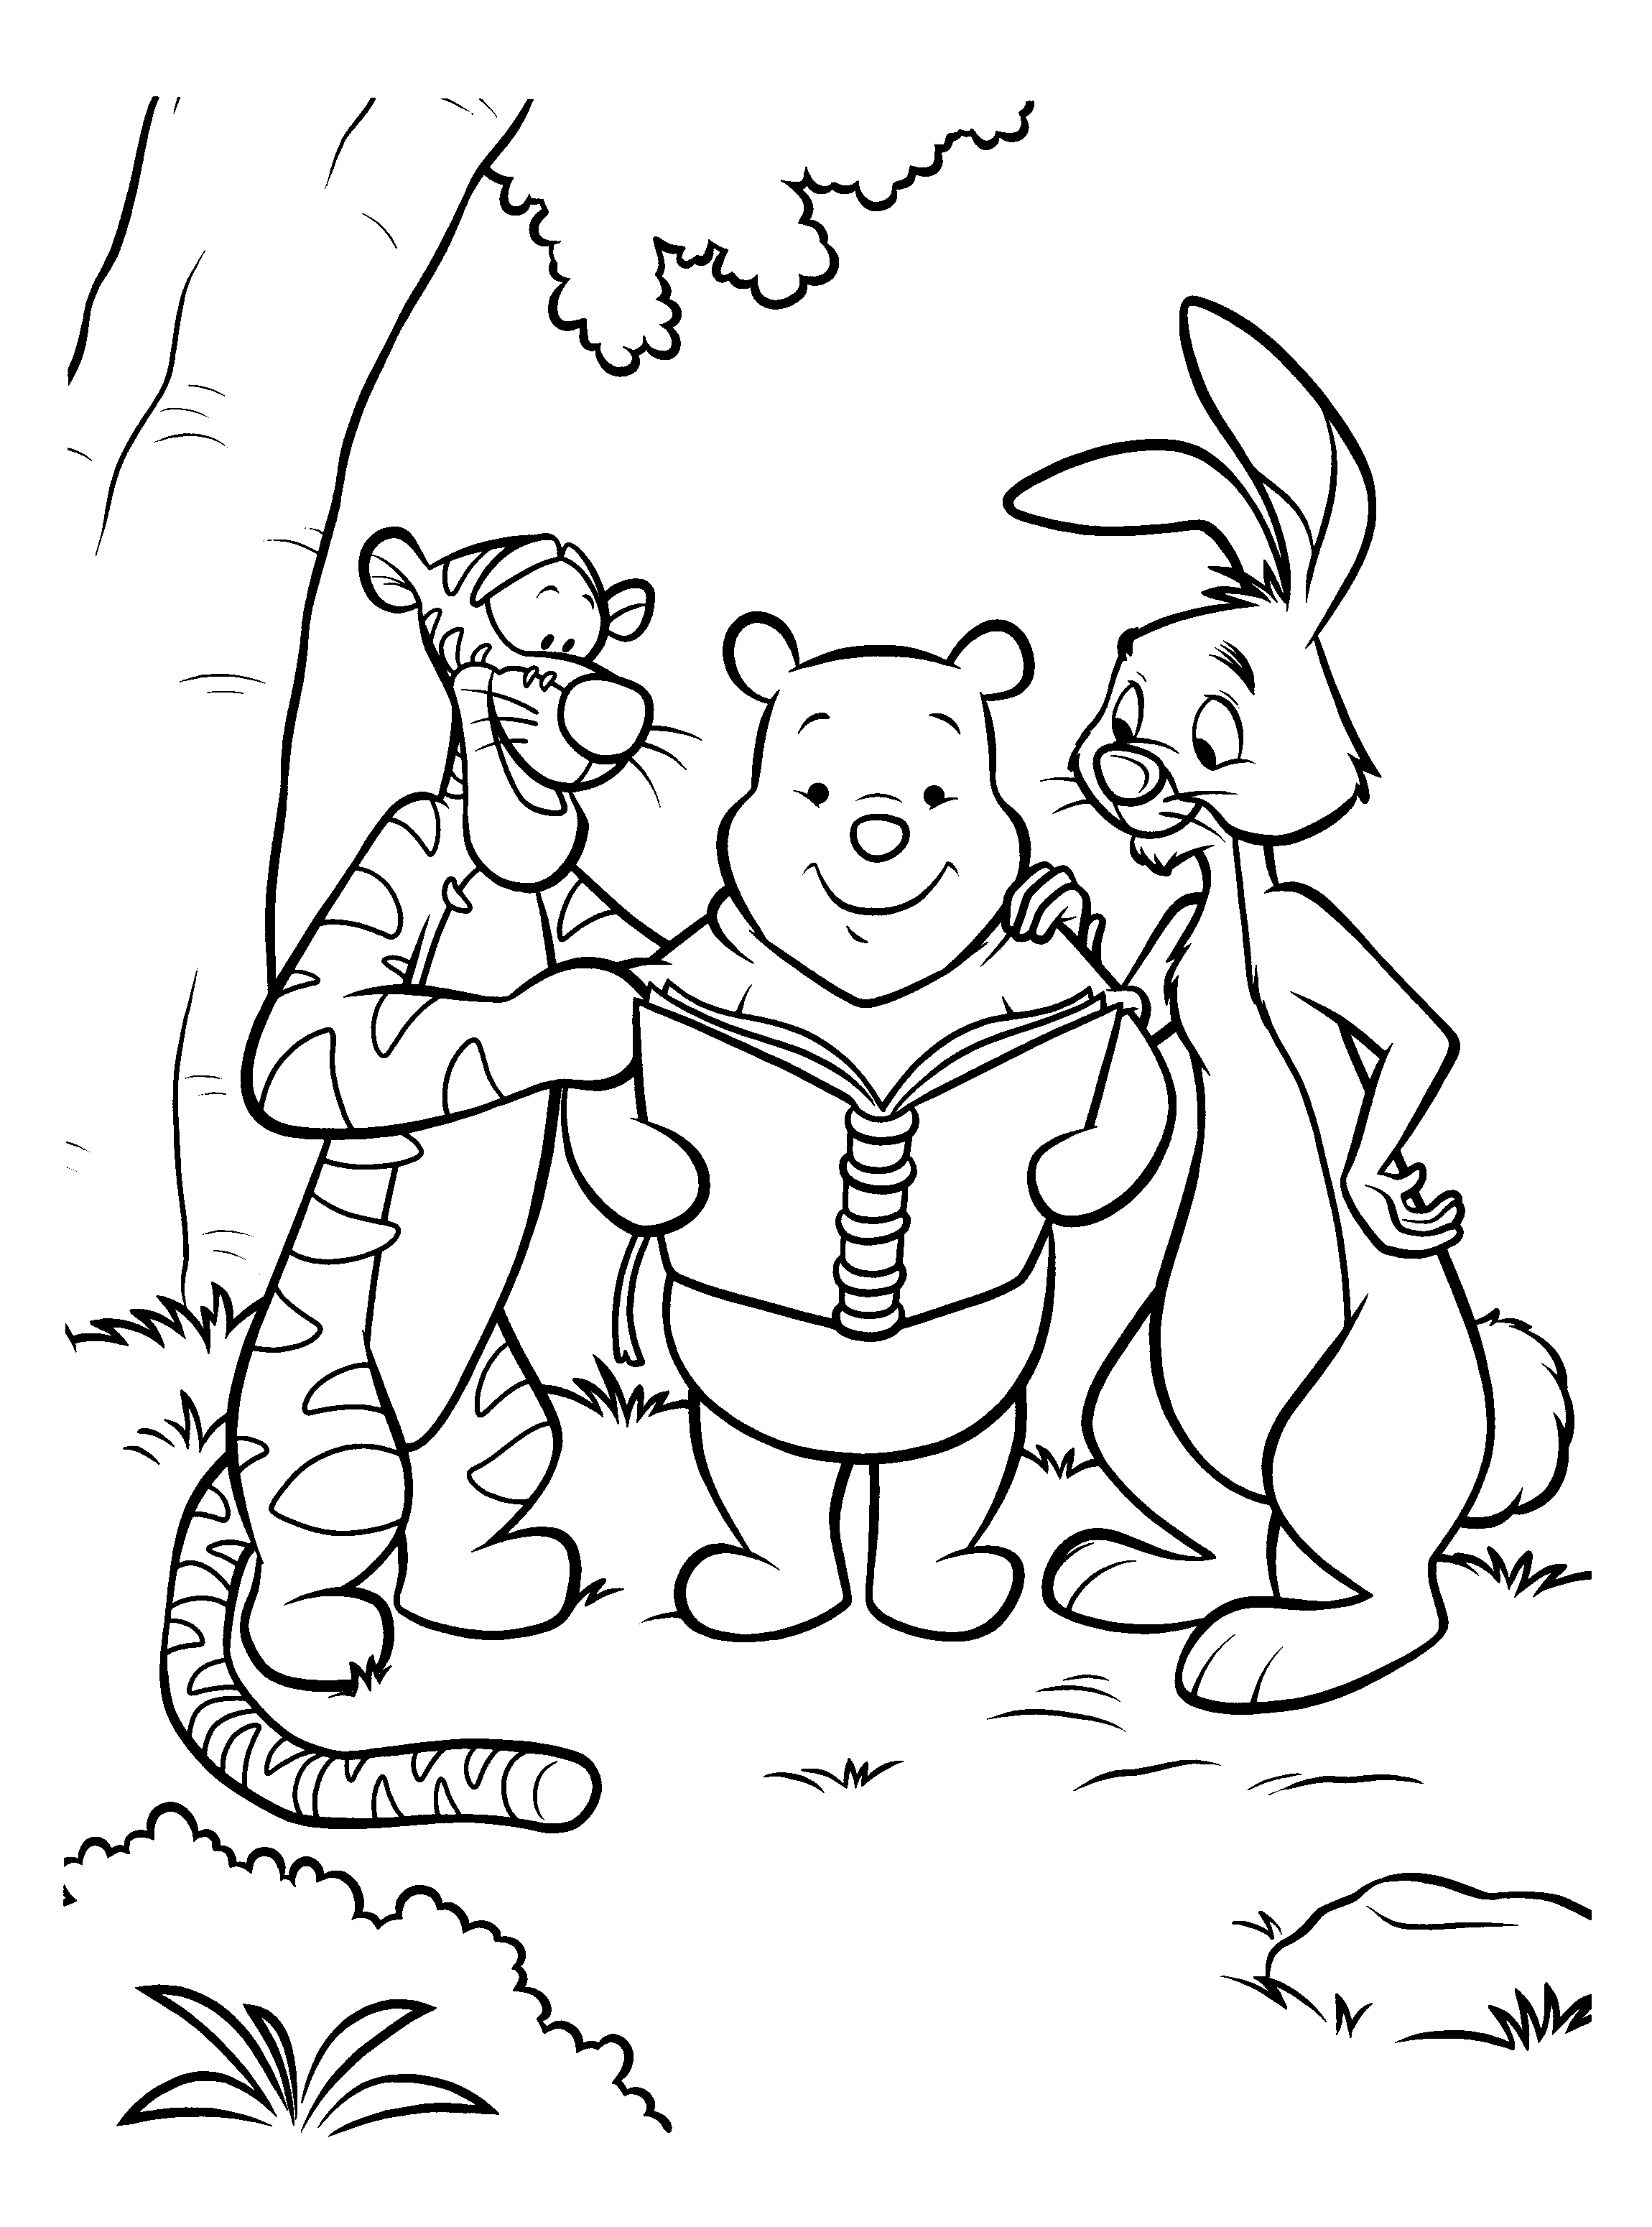 Pooh Tigger and Rabbit Coloring Pages